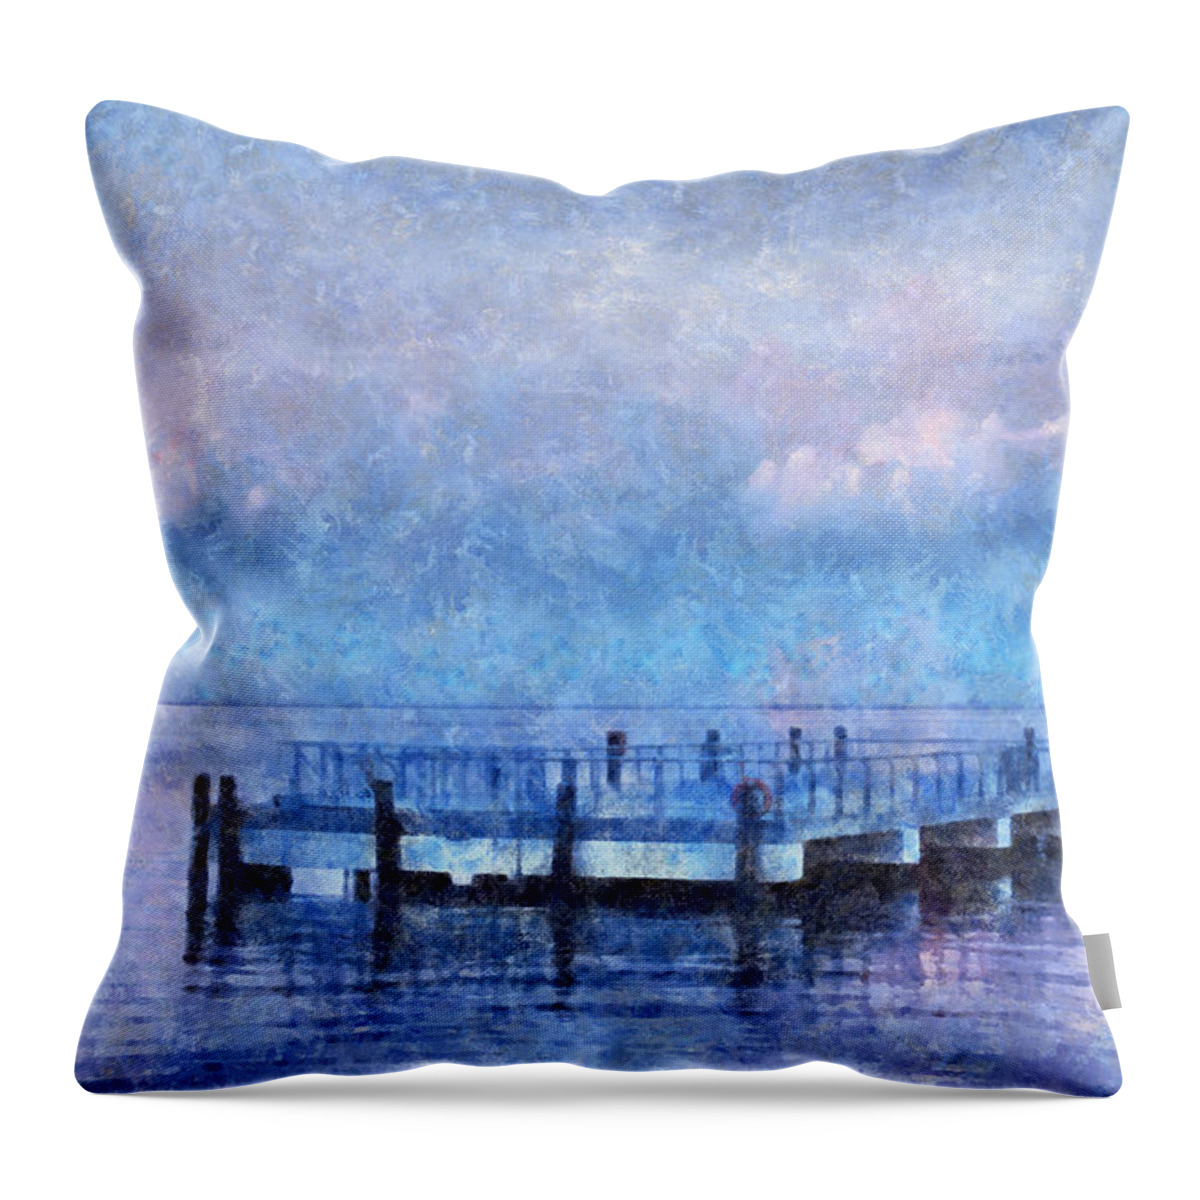 Water Throw Pillow featuring the mixed media Lewes Pier by Trish Tritz